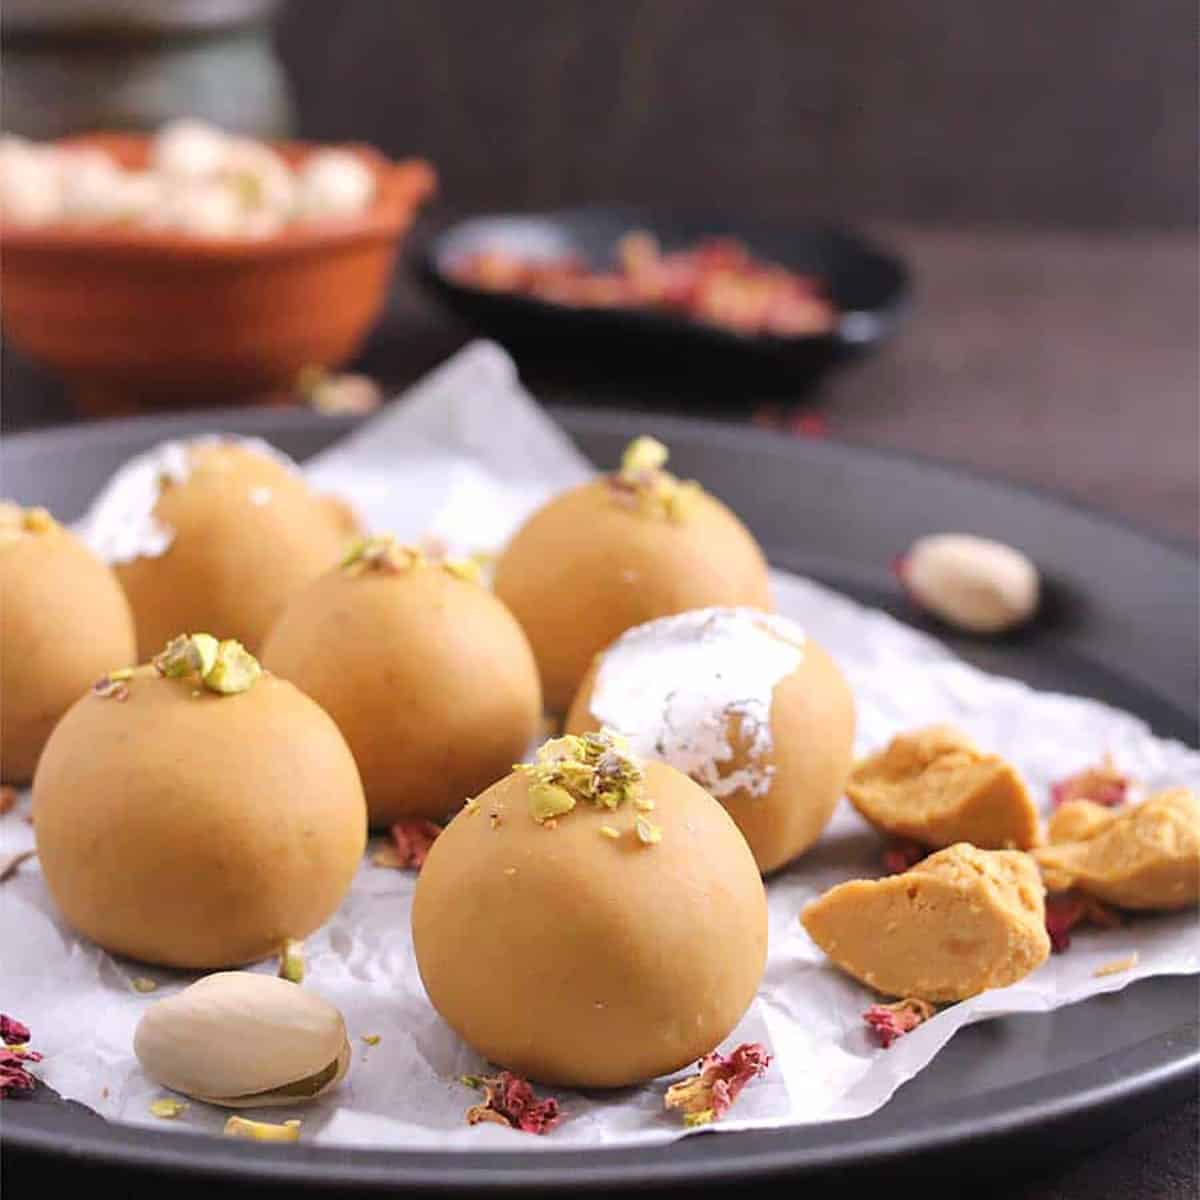 Besan Ladoo garnished with rose petals and crushed pistachios.